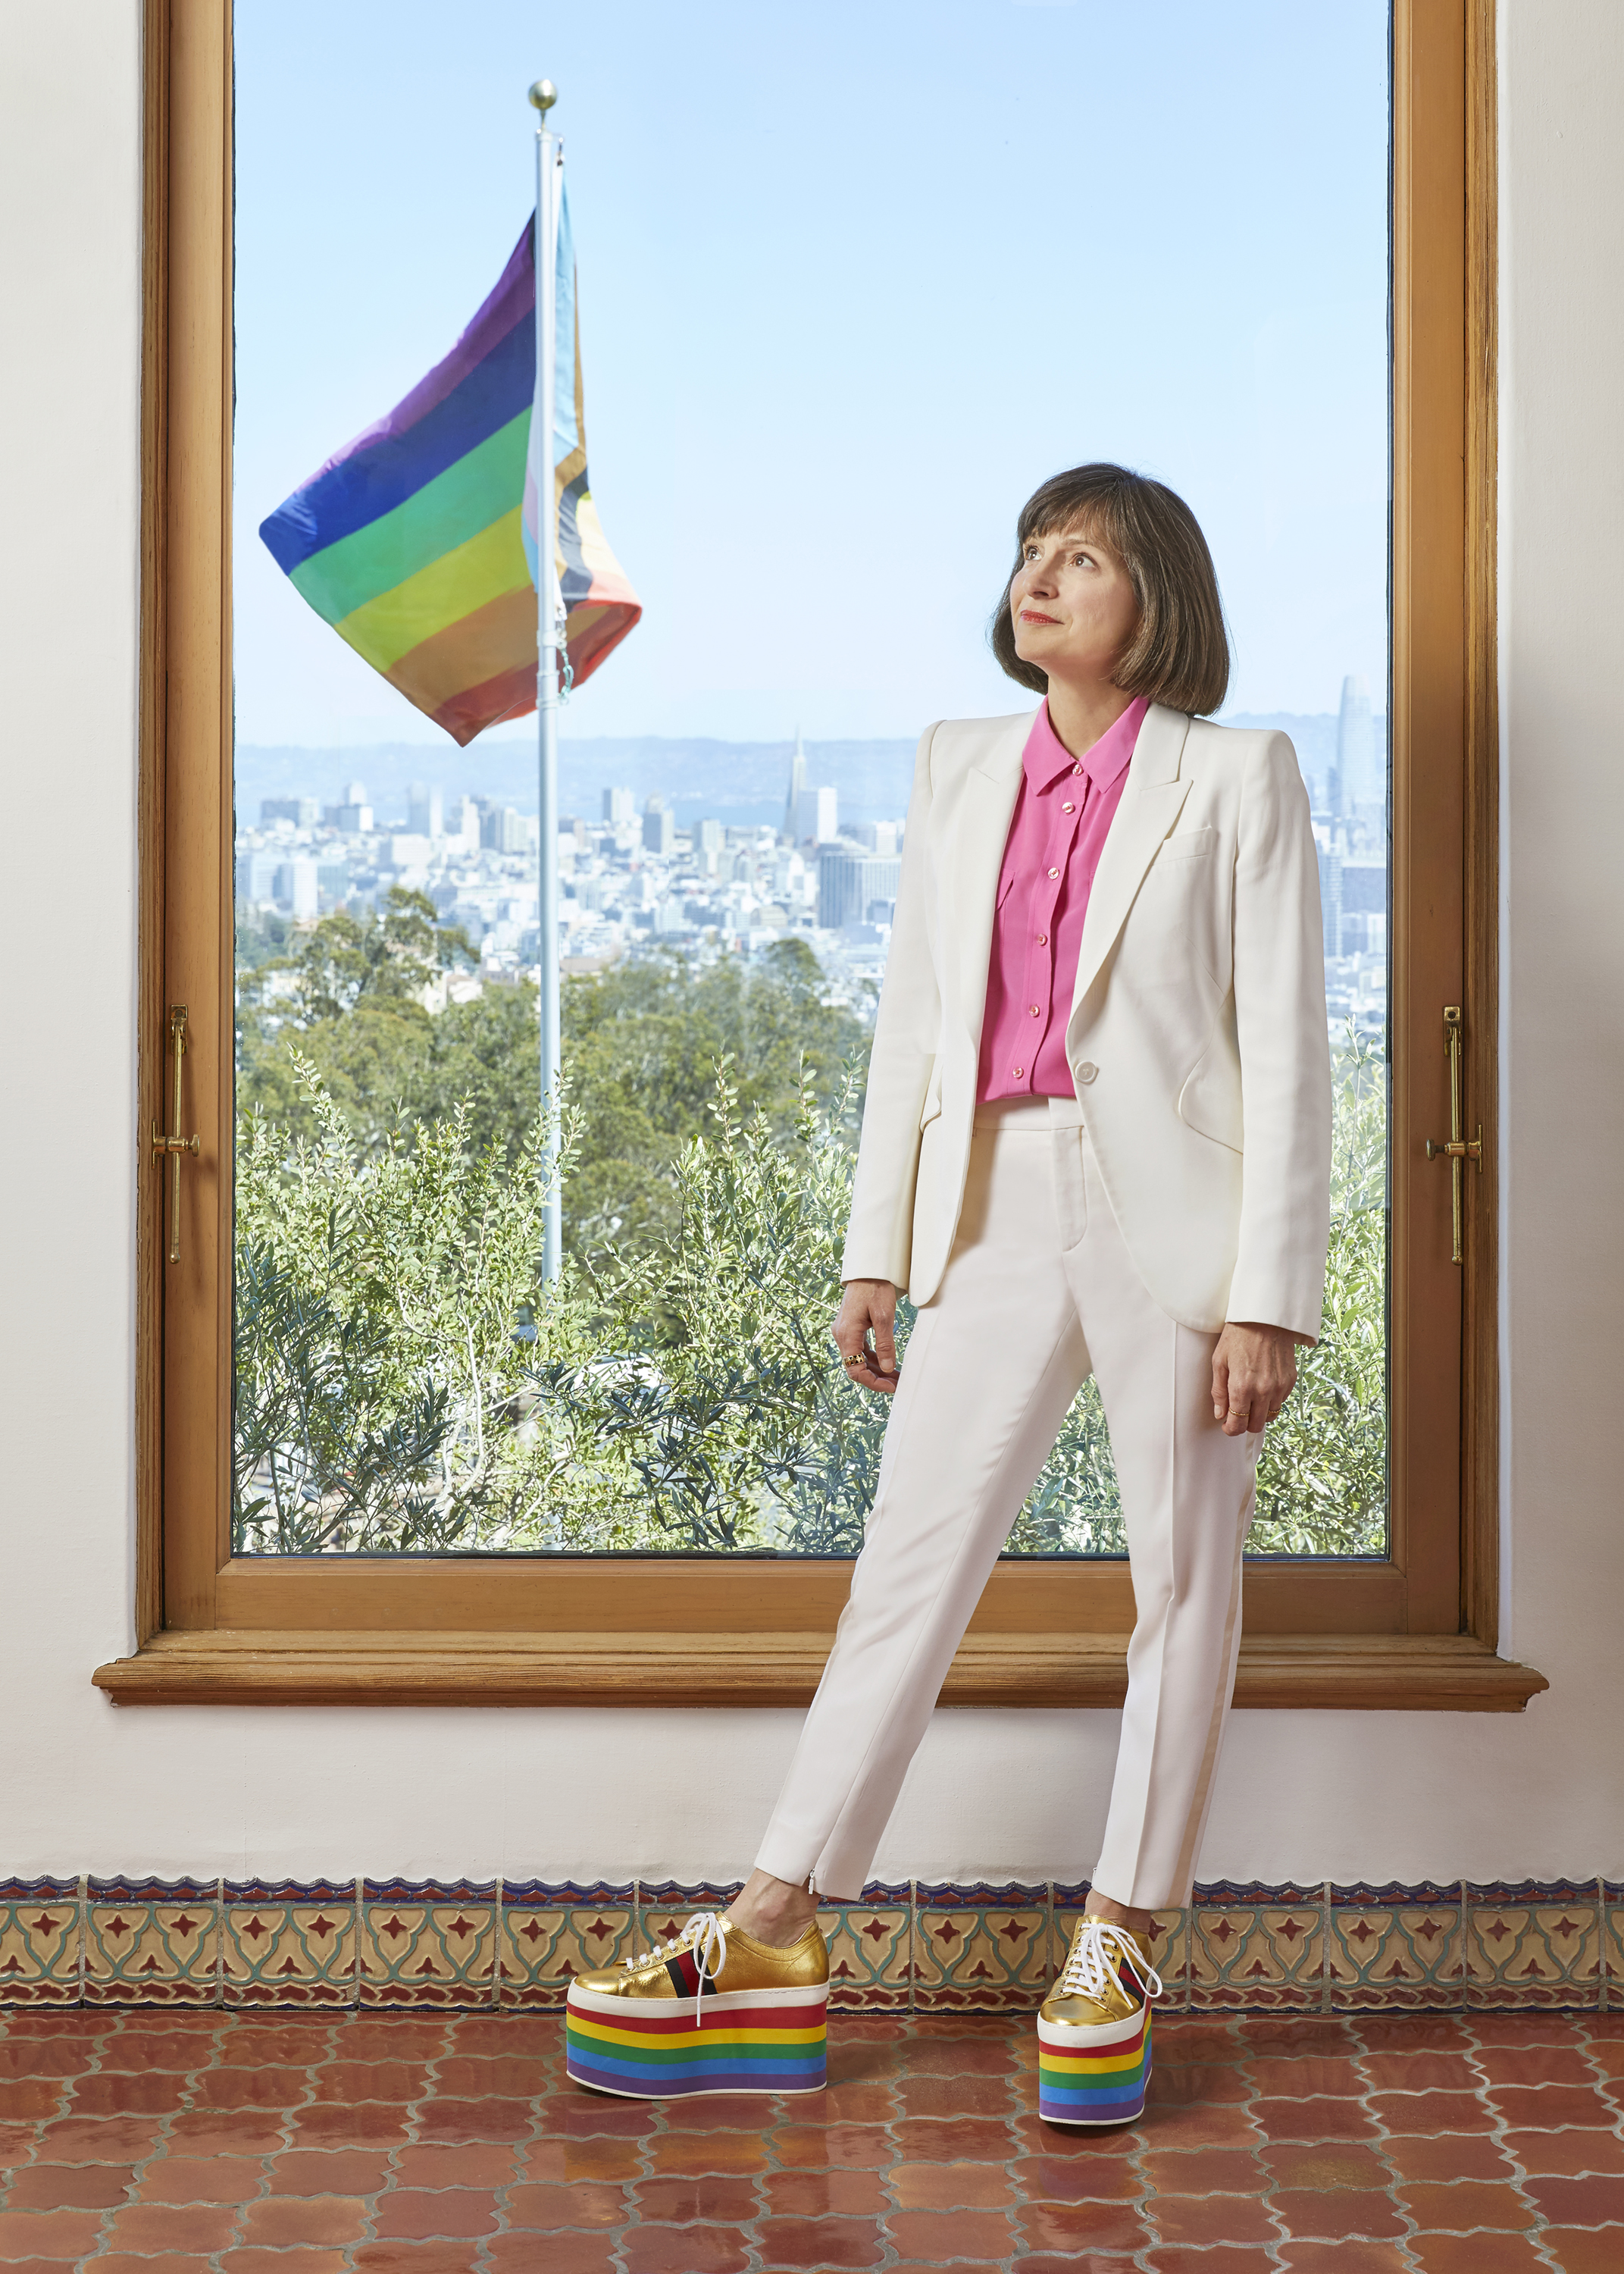 A person stands by a window, wearing a white suit and rainbow-platform sneakers, with a pride flag outside.